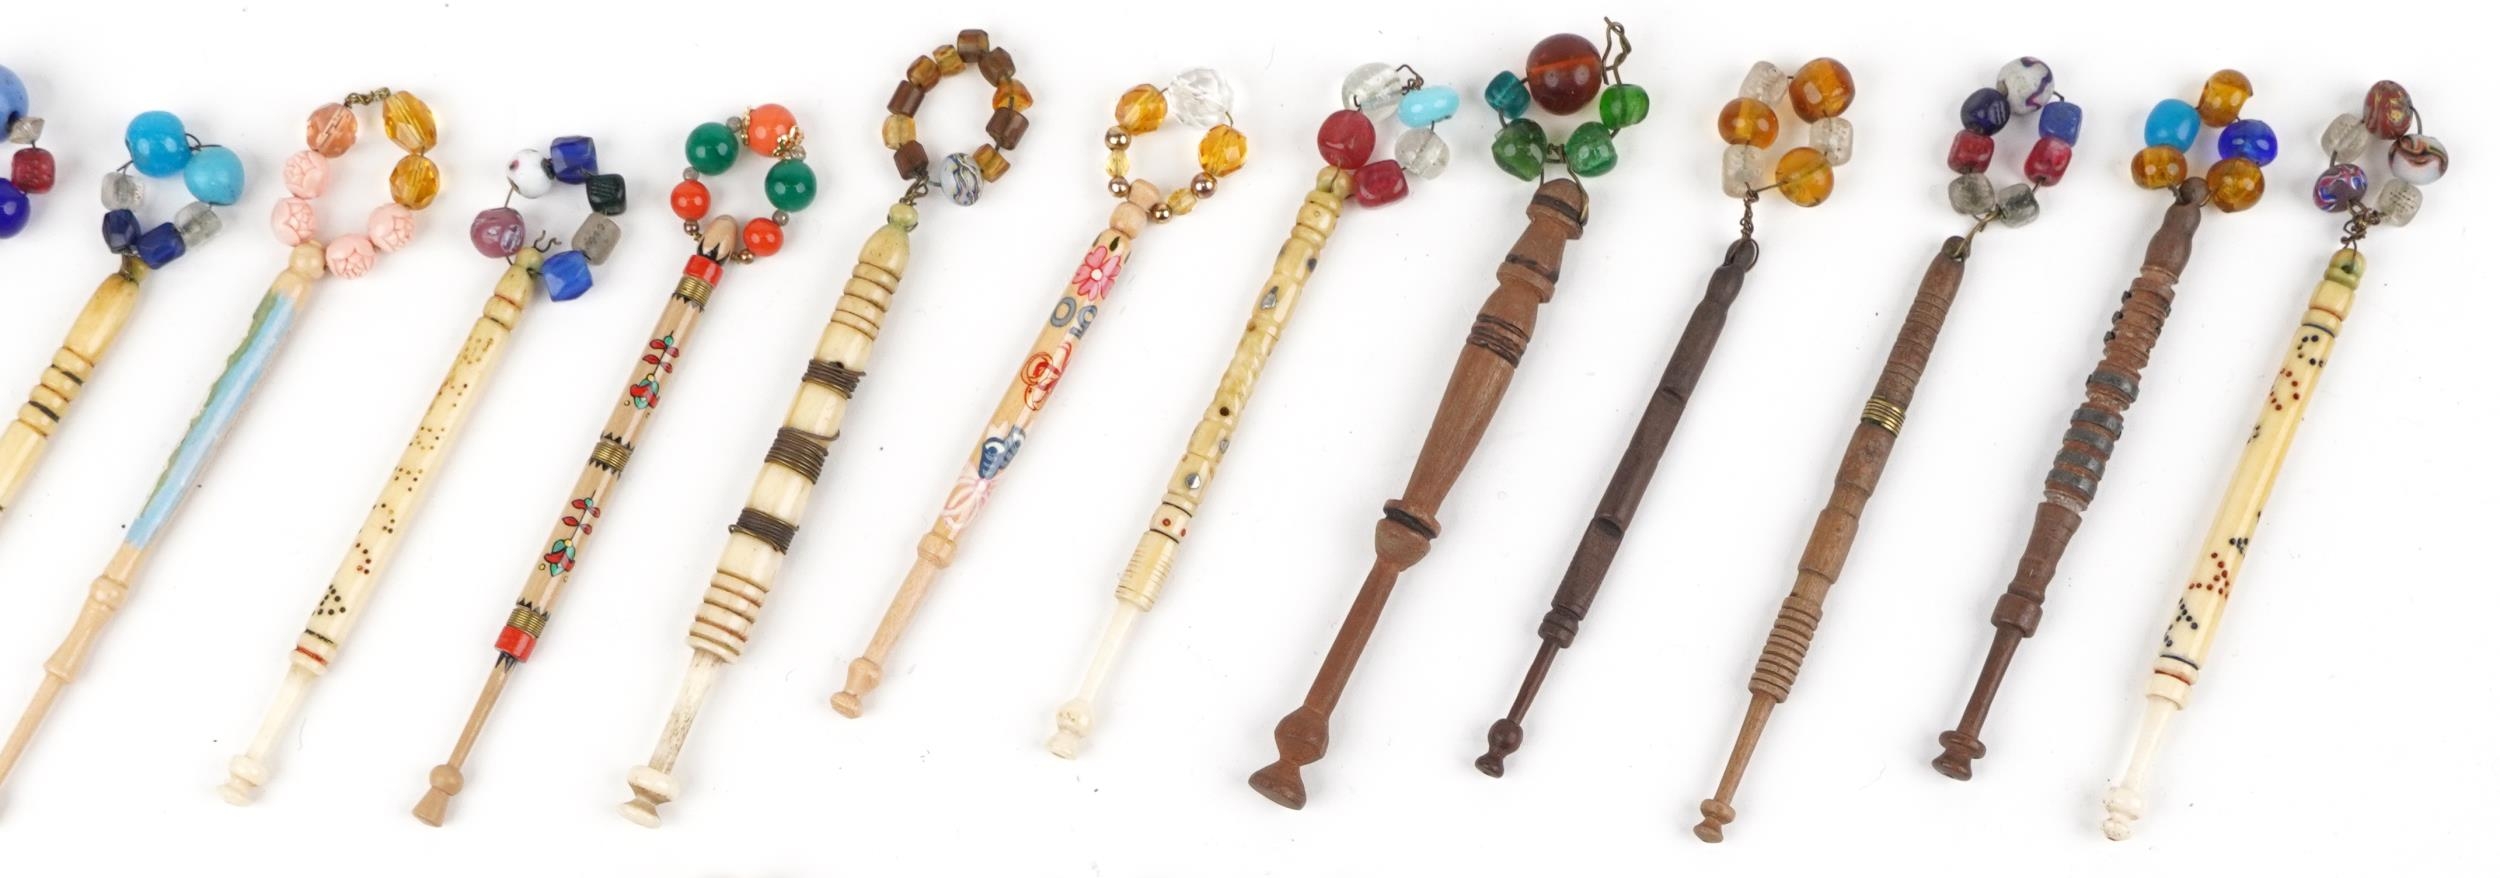 Collection of sewing interest carved bone and hardwood lace making bobbins with beads - Image 3 of 5